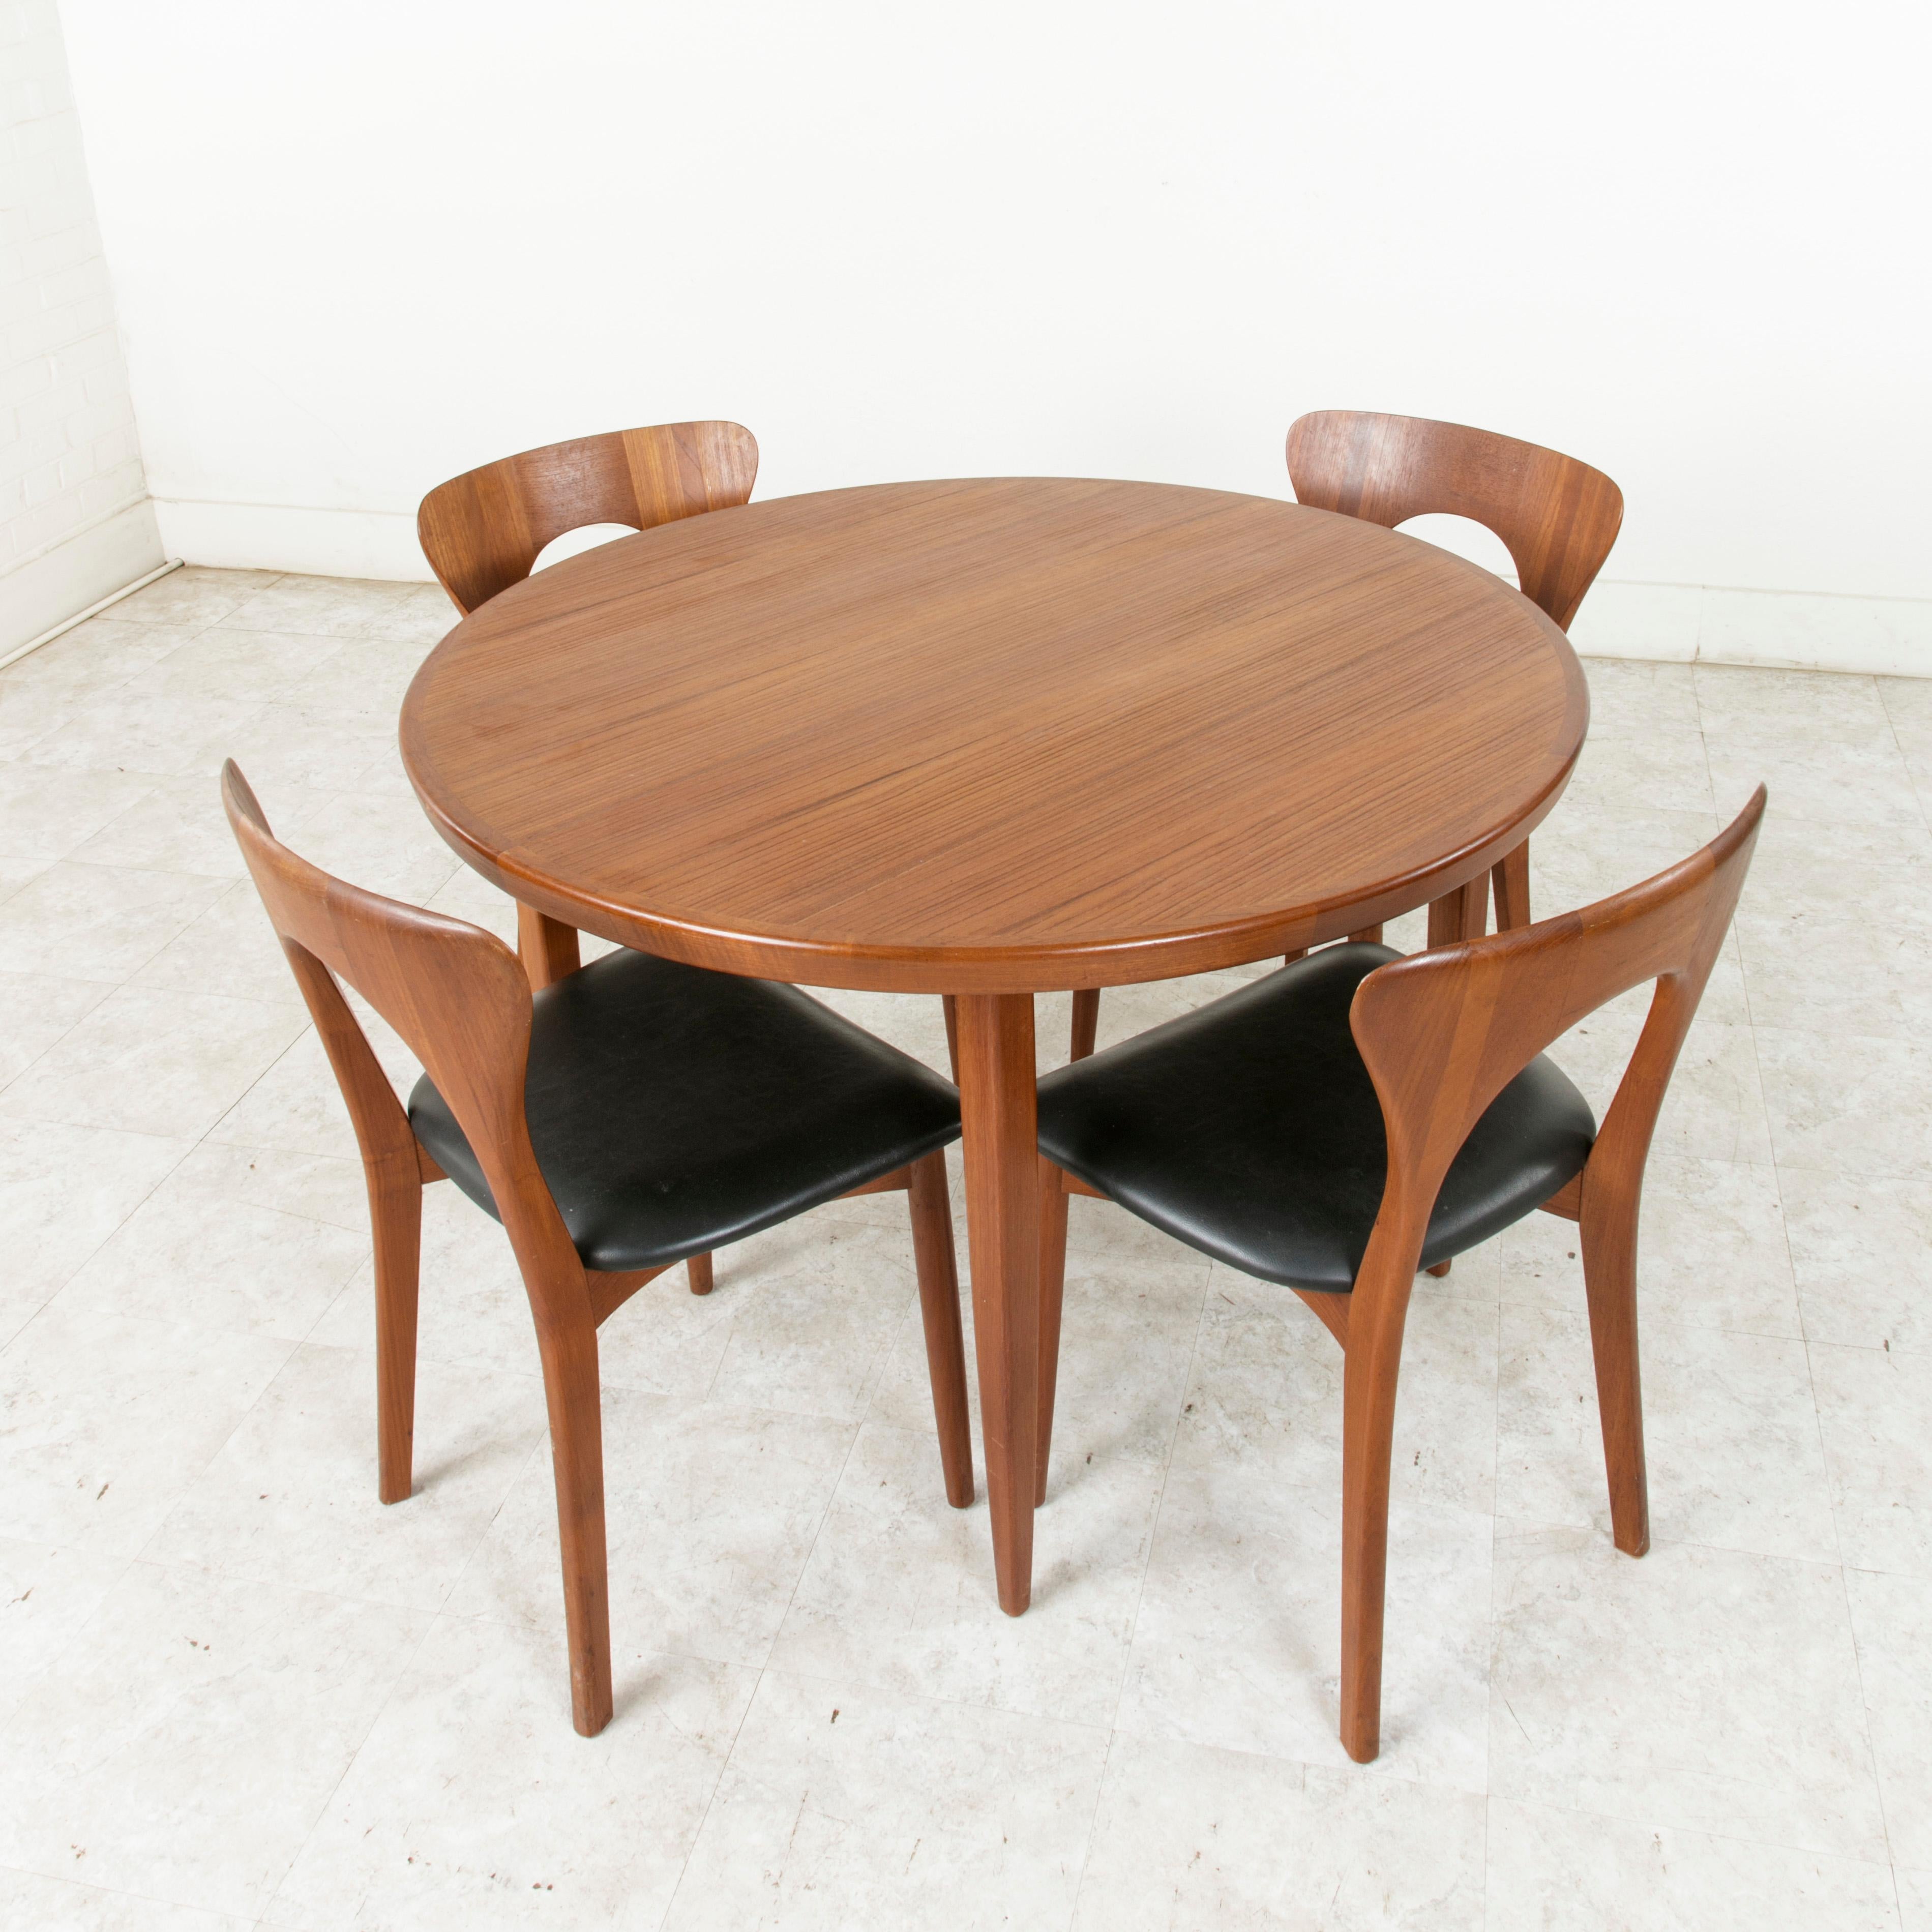 This mid-20th century Danish dining set includes a round teak table and four chairs designed by renowned Danish designer Niels Koefoed. The table measures 43 inches in diameter and rests on slender tapered legs. Its four chairs are of the Peter